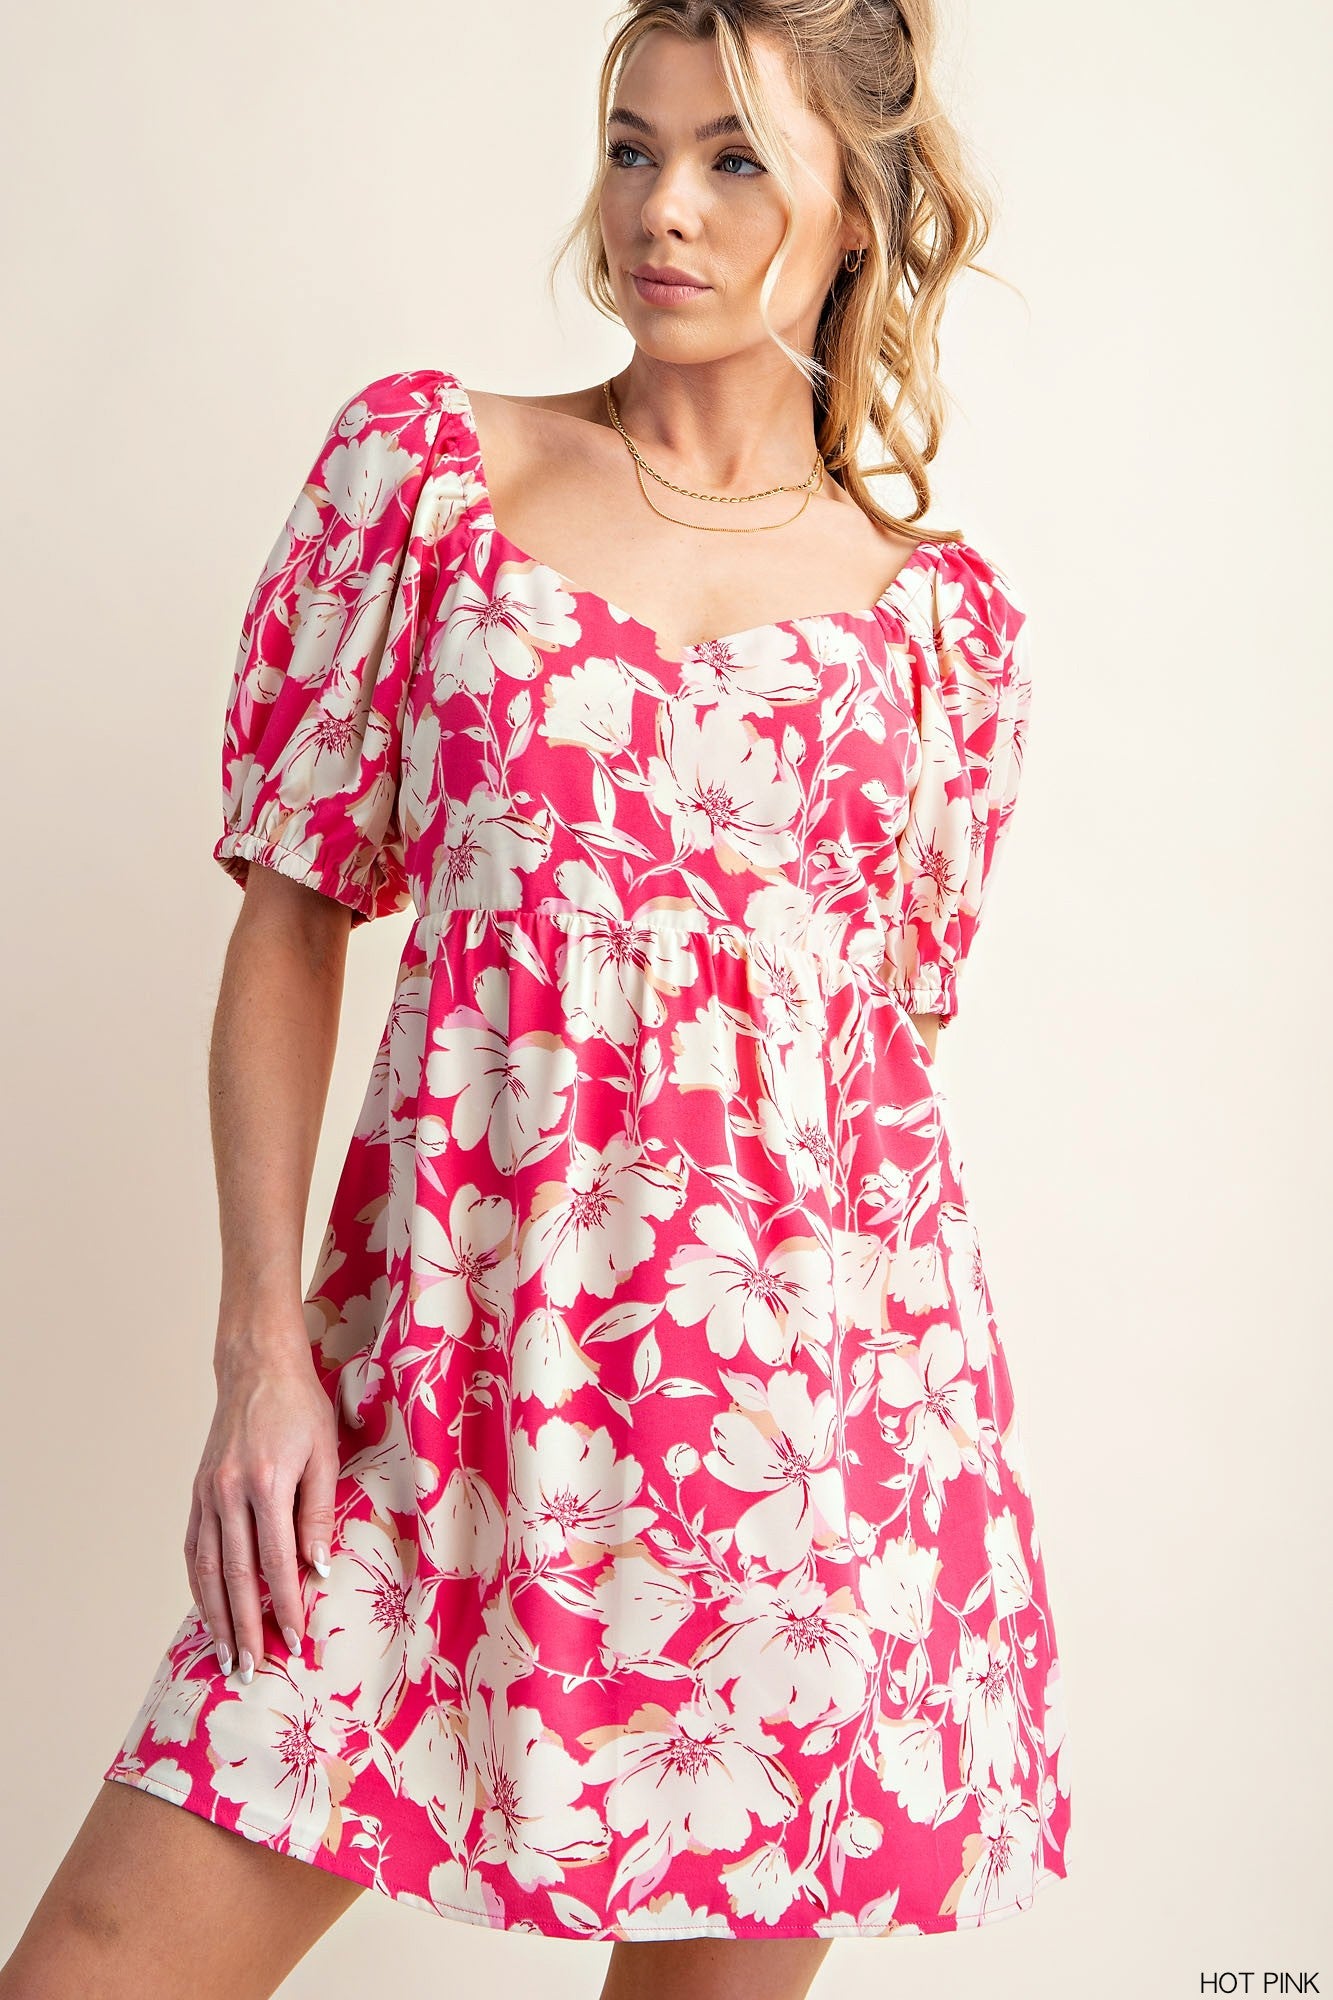 SOFT FLORAL PRINTED BABY DOLL BUBBLE SLEEVE DRESS - HOT PINK